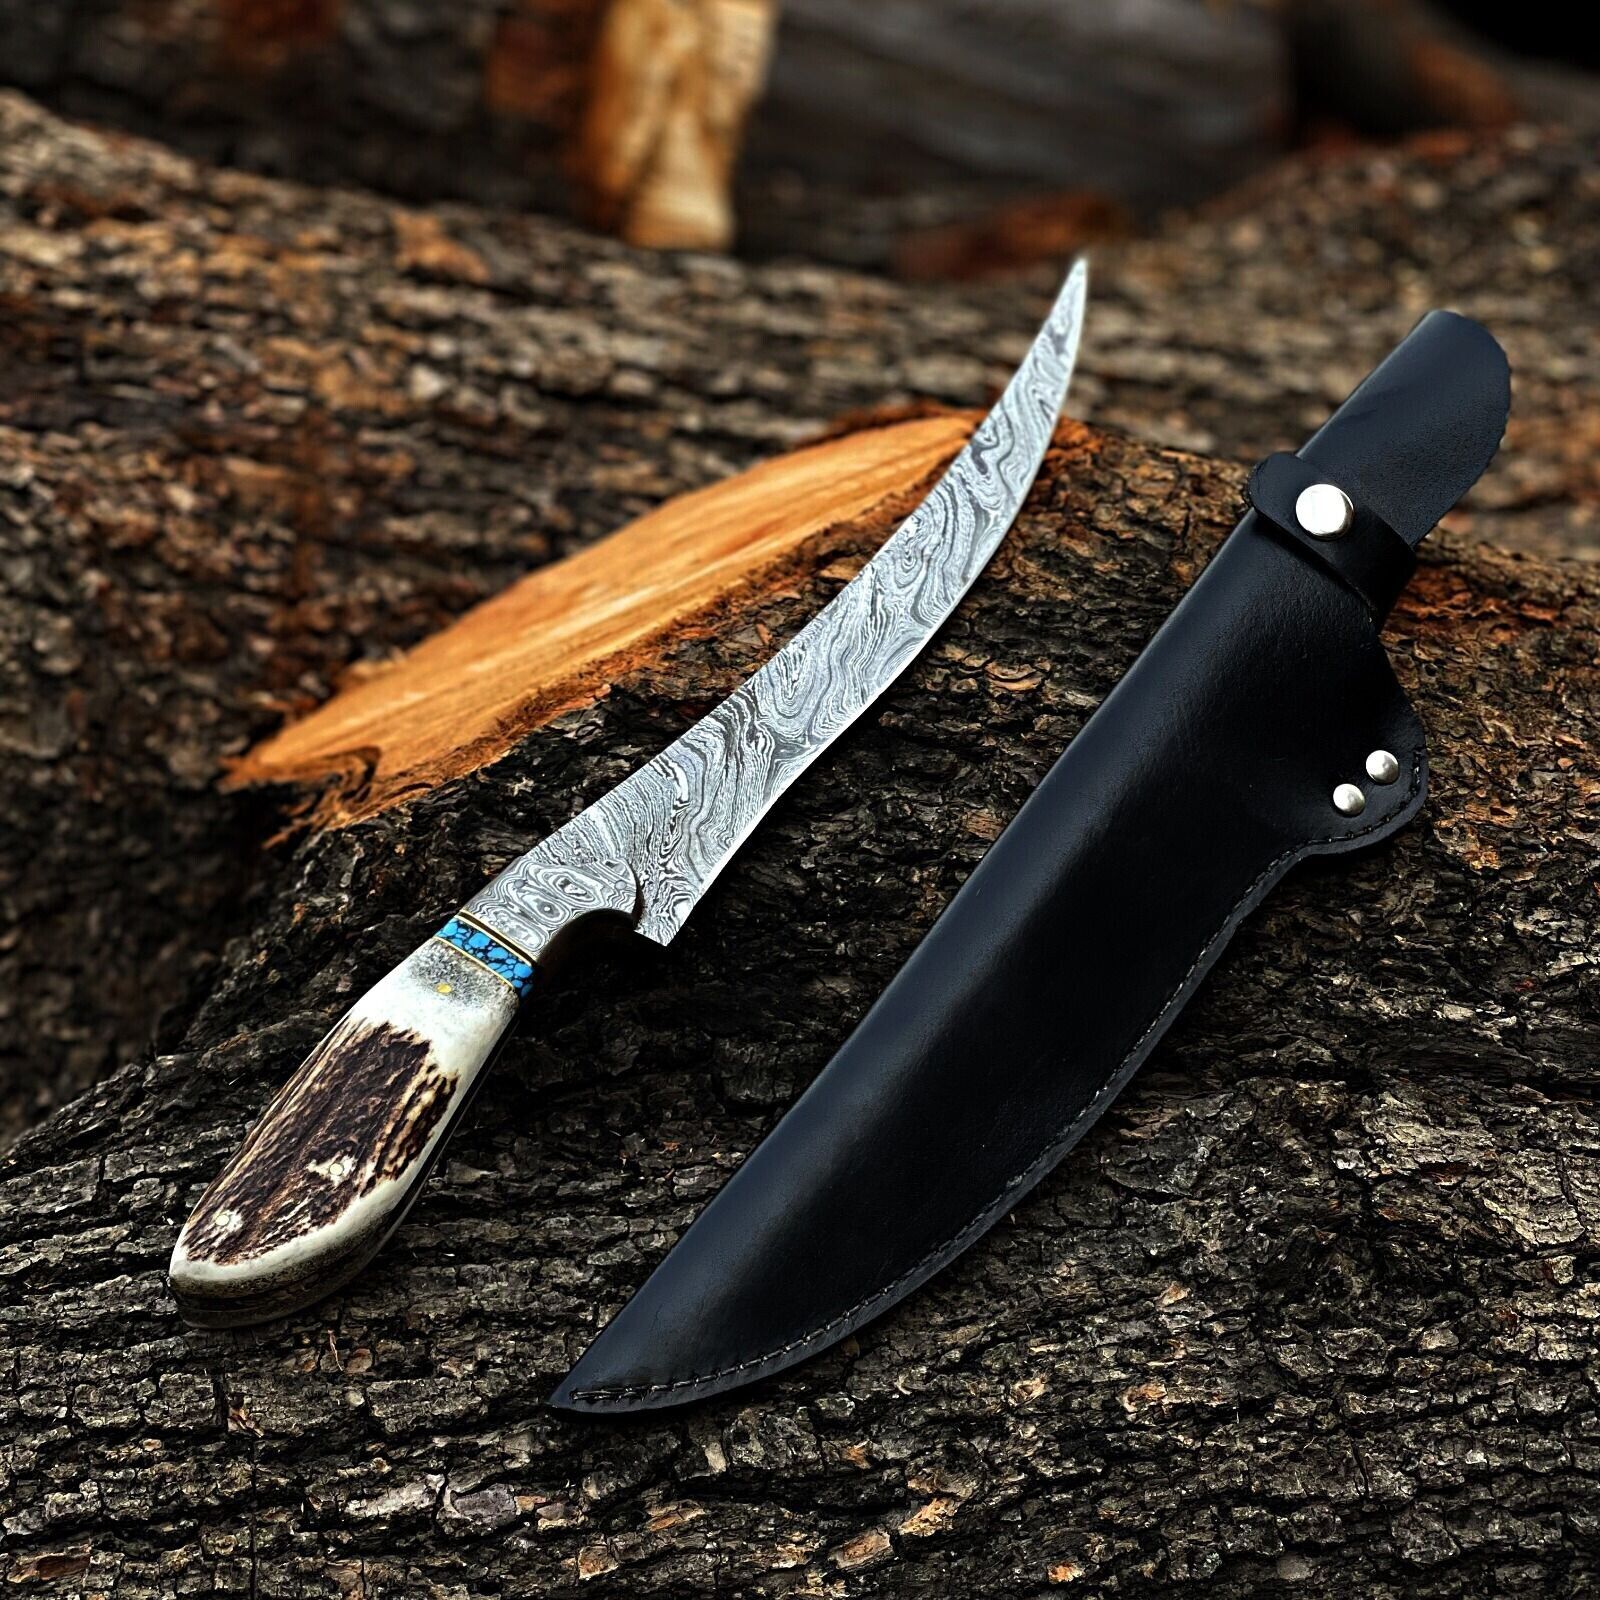 Beautiful Handmade Damascus Steel Hunting Bowie Knife Camping Knife With Sheath